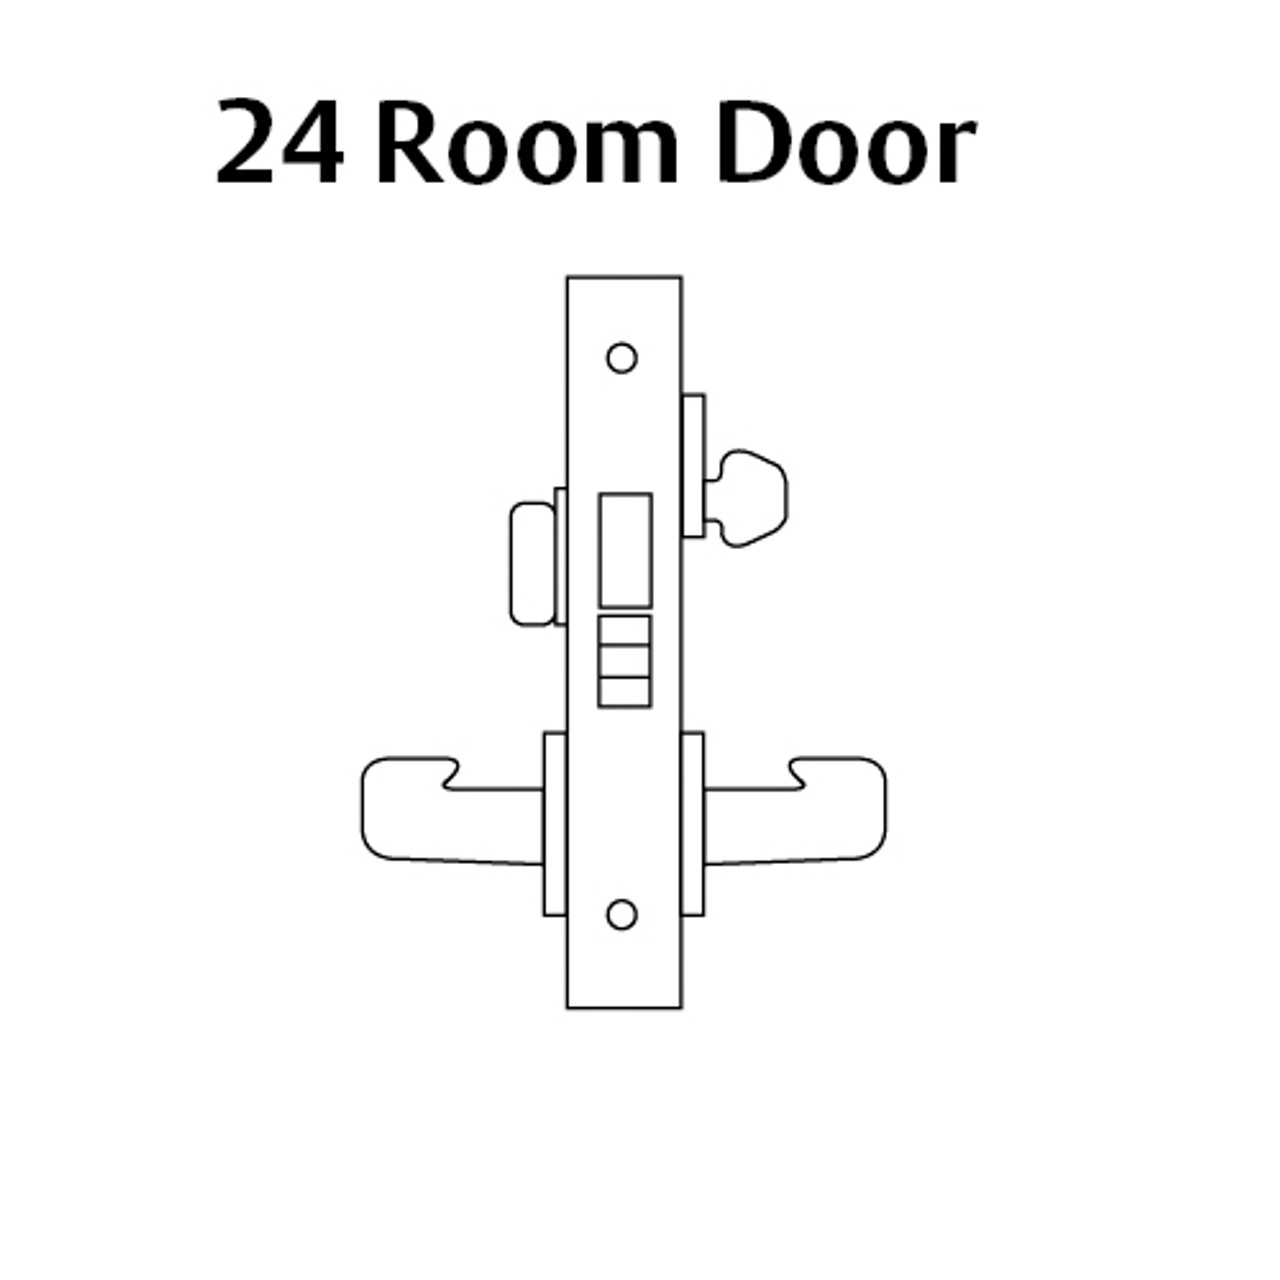 8224-LNL-26D Sargent 8200 Series Room Door Mortise Lock with LNL Lever Trim and Deadbolt in Satin Chrome